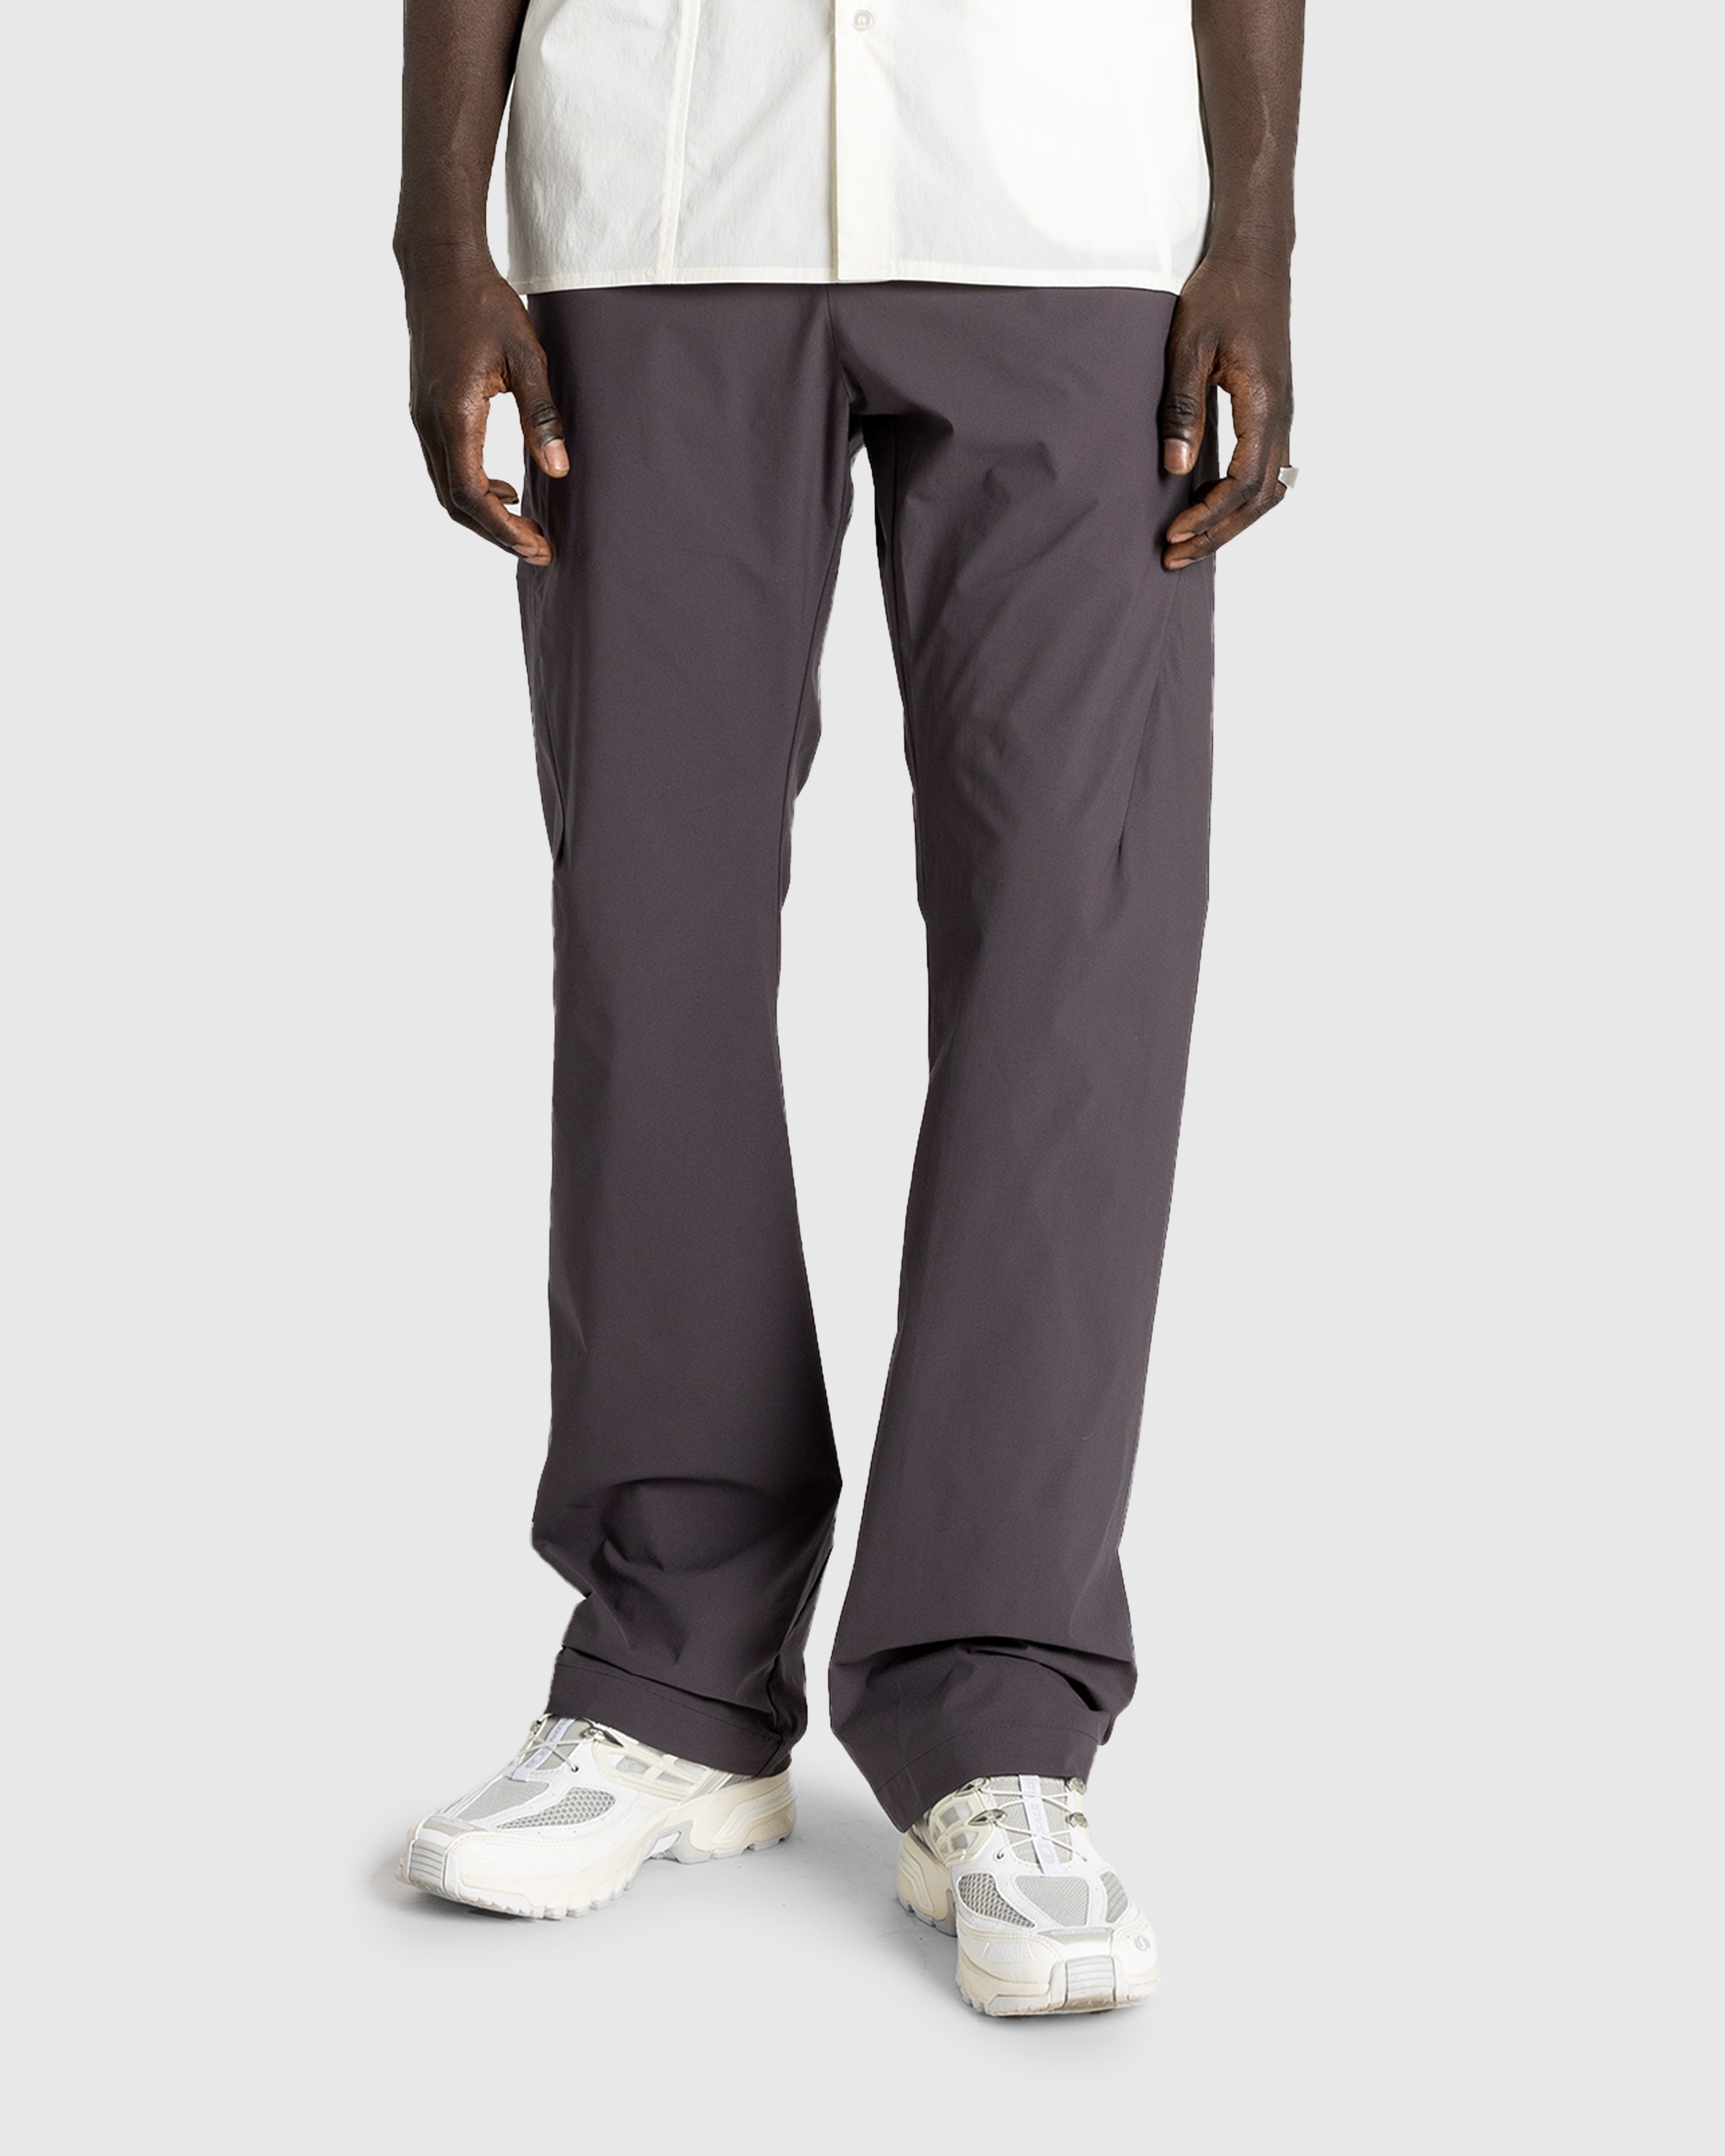 Post Archive Faction (PAF) – 6.0 Technical Pants Right Brown - 2